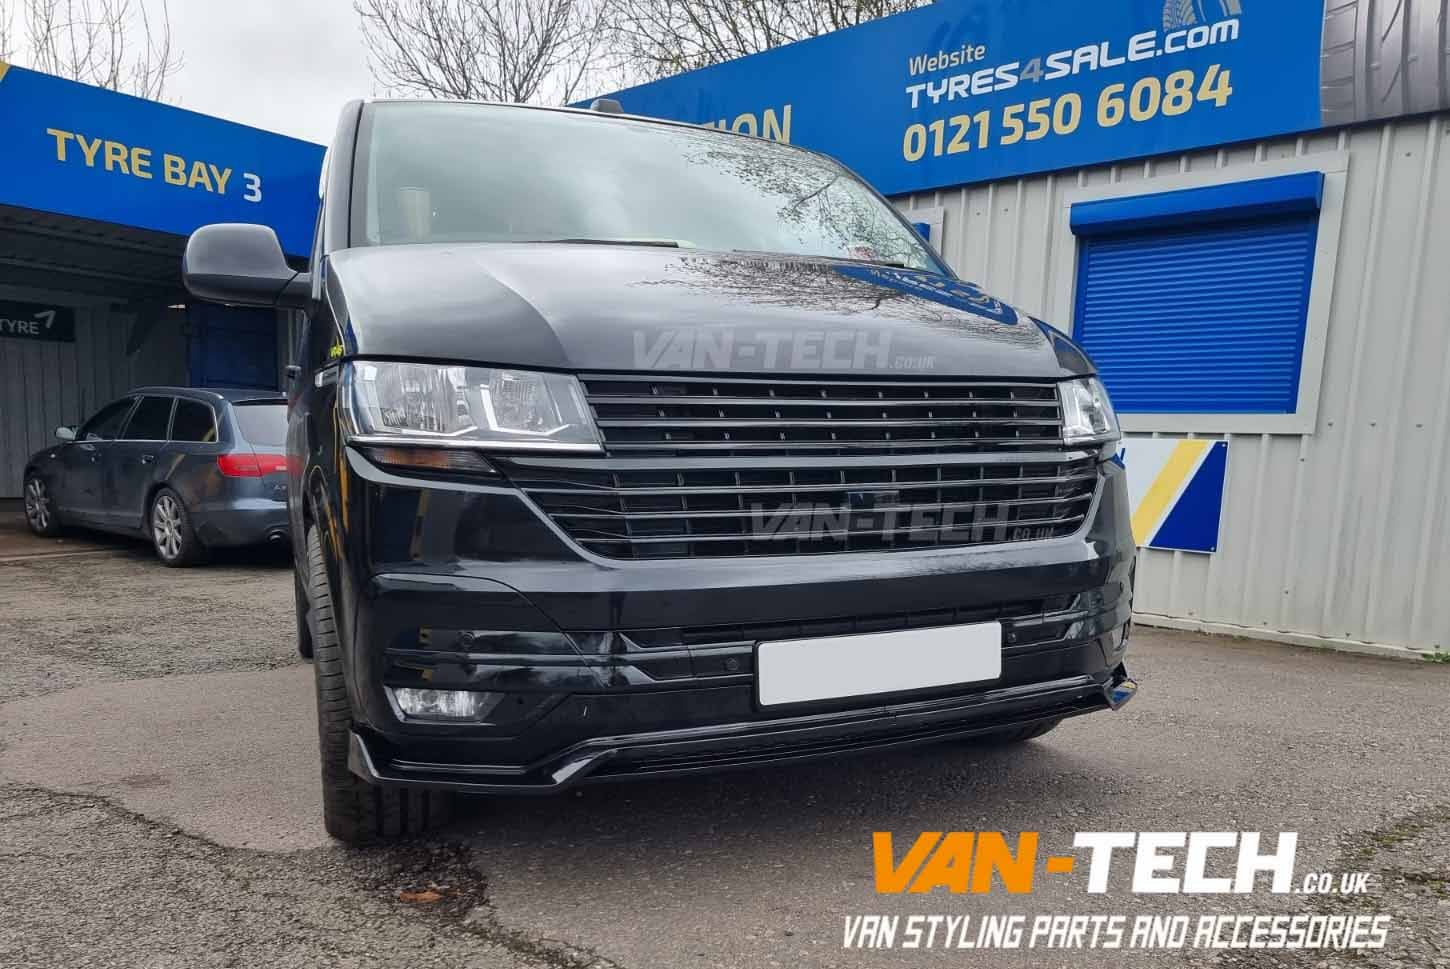 VW Transporter T6.1 Badgeless and Badged Front Grilles Gloss Black